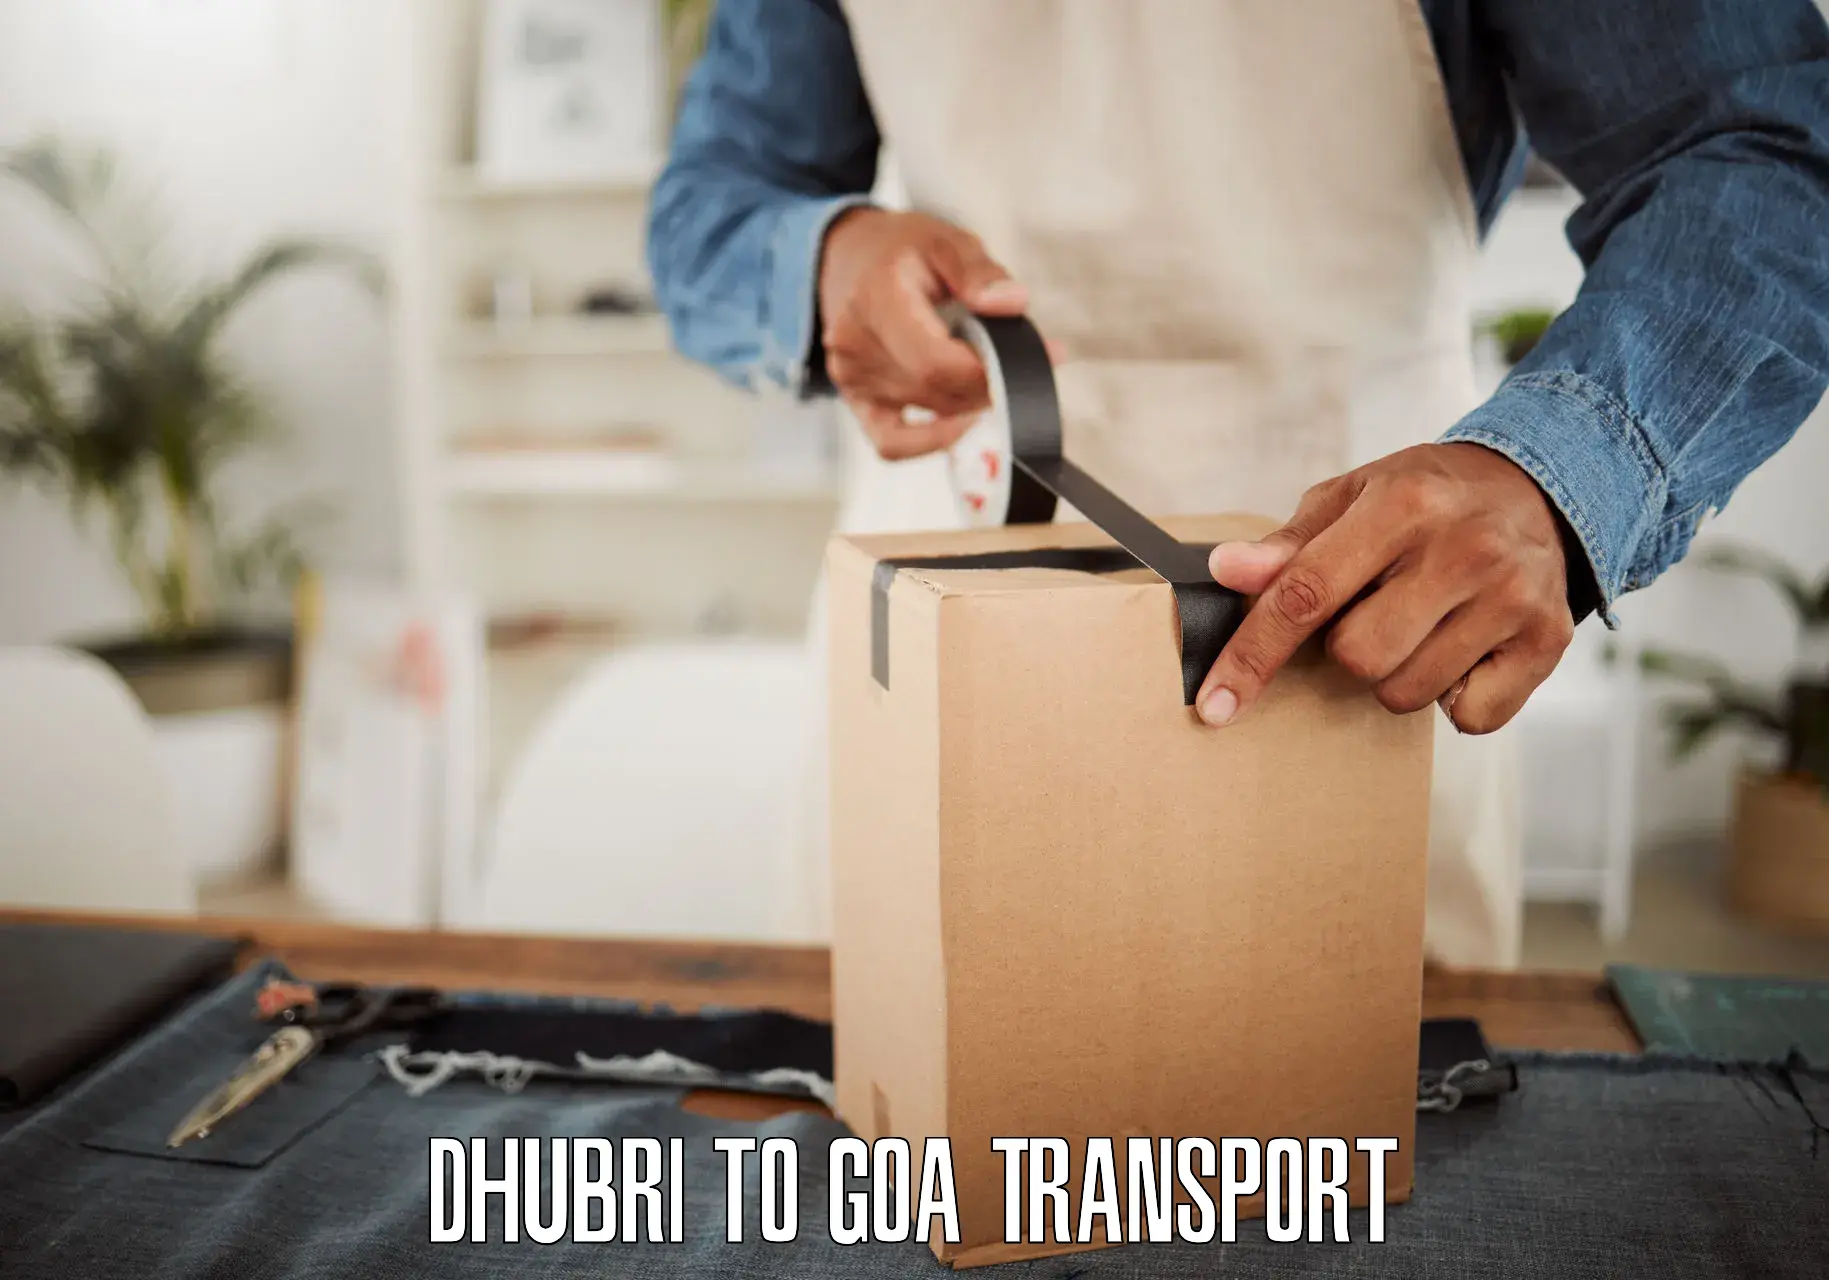 Delivery service Dhubri to Goa